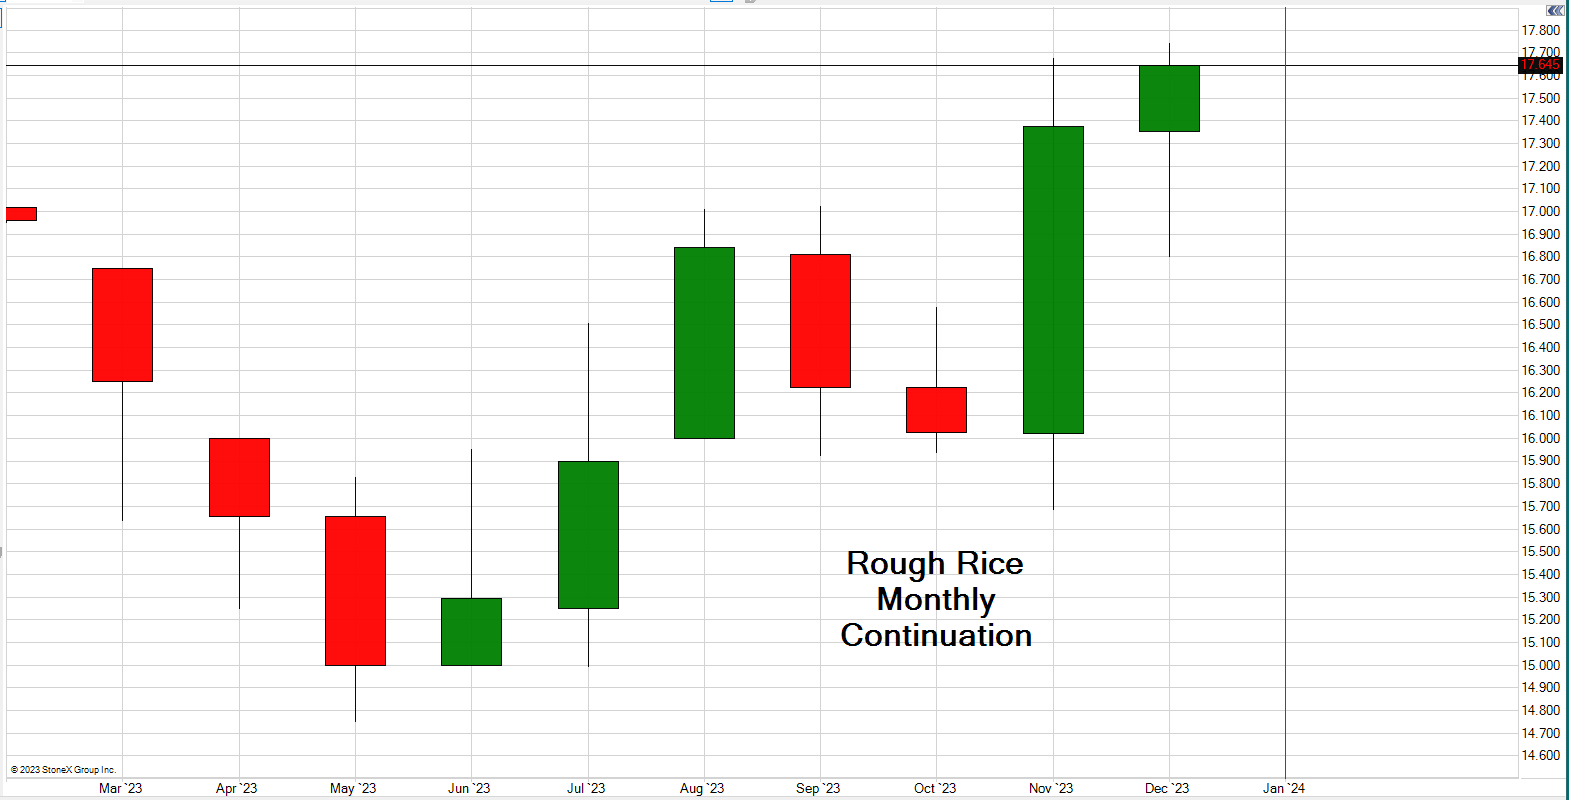 Rough Rice Futures Trading Chart updated March 10th, 2023